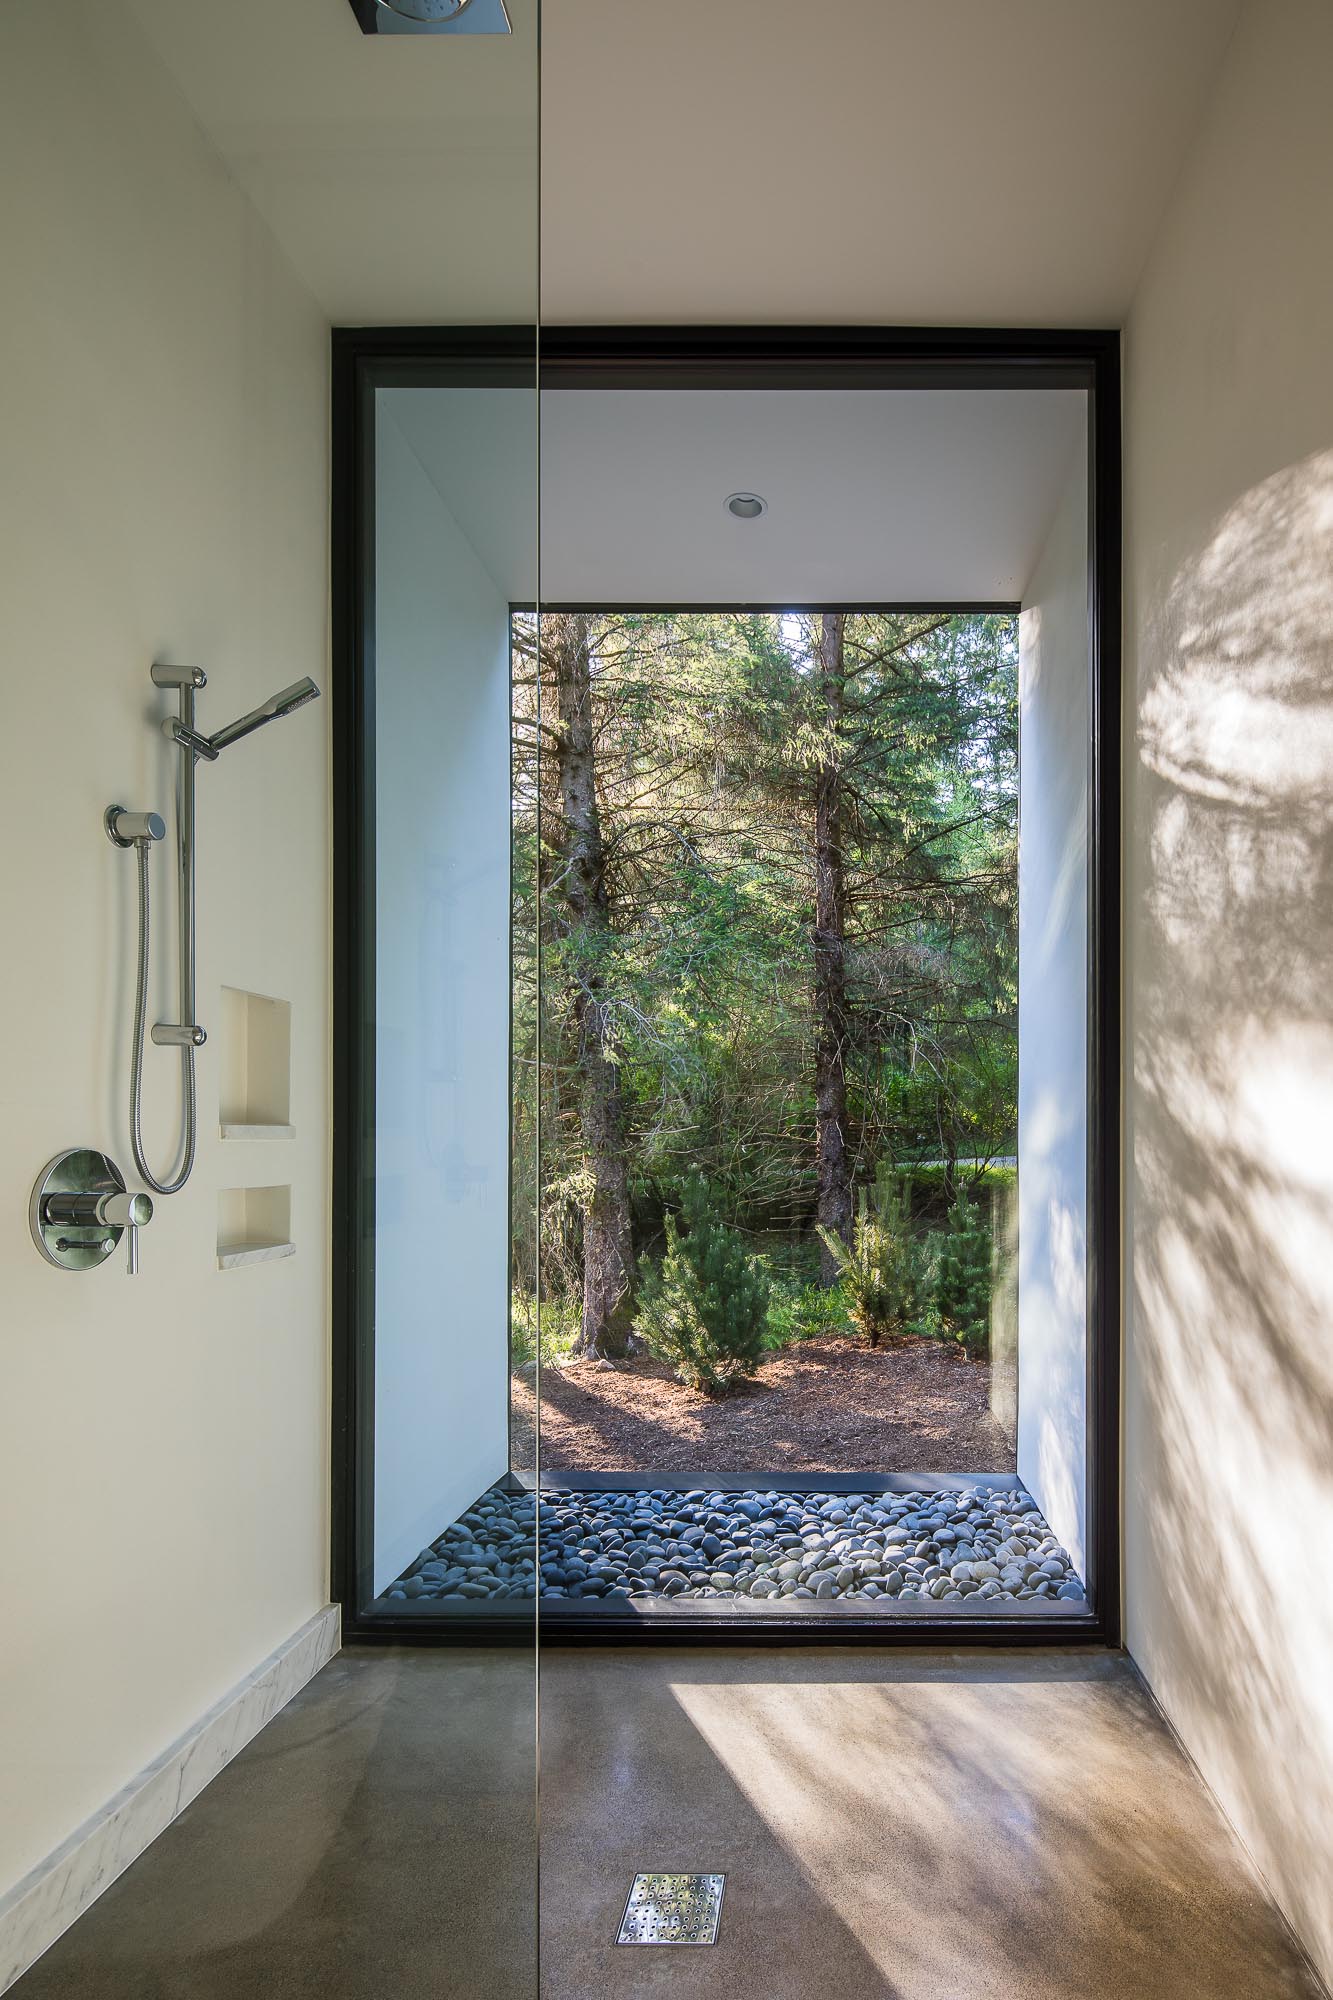 This modern bathroom includes a shower that has an uninterrupted view of the trees.